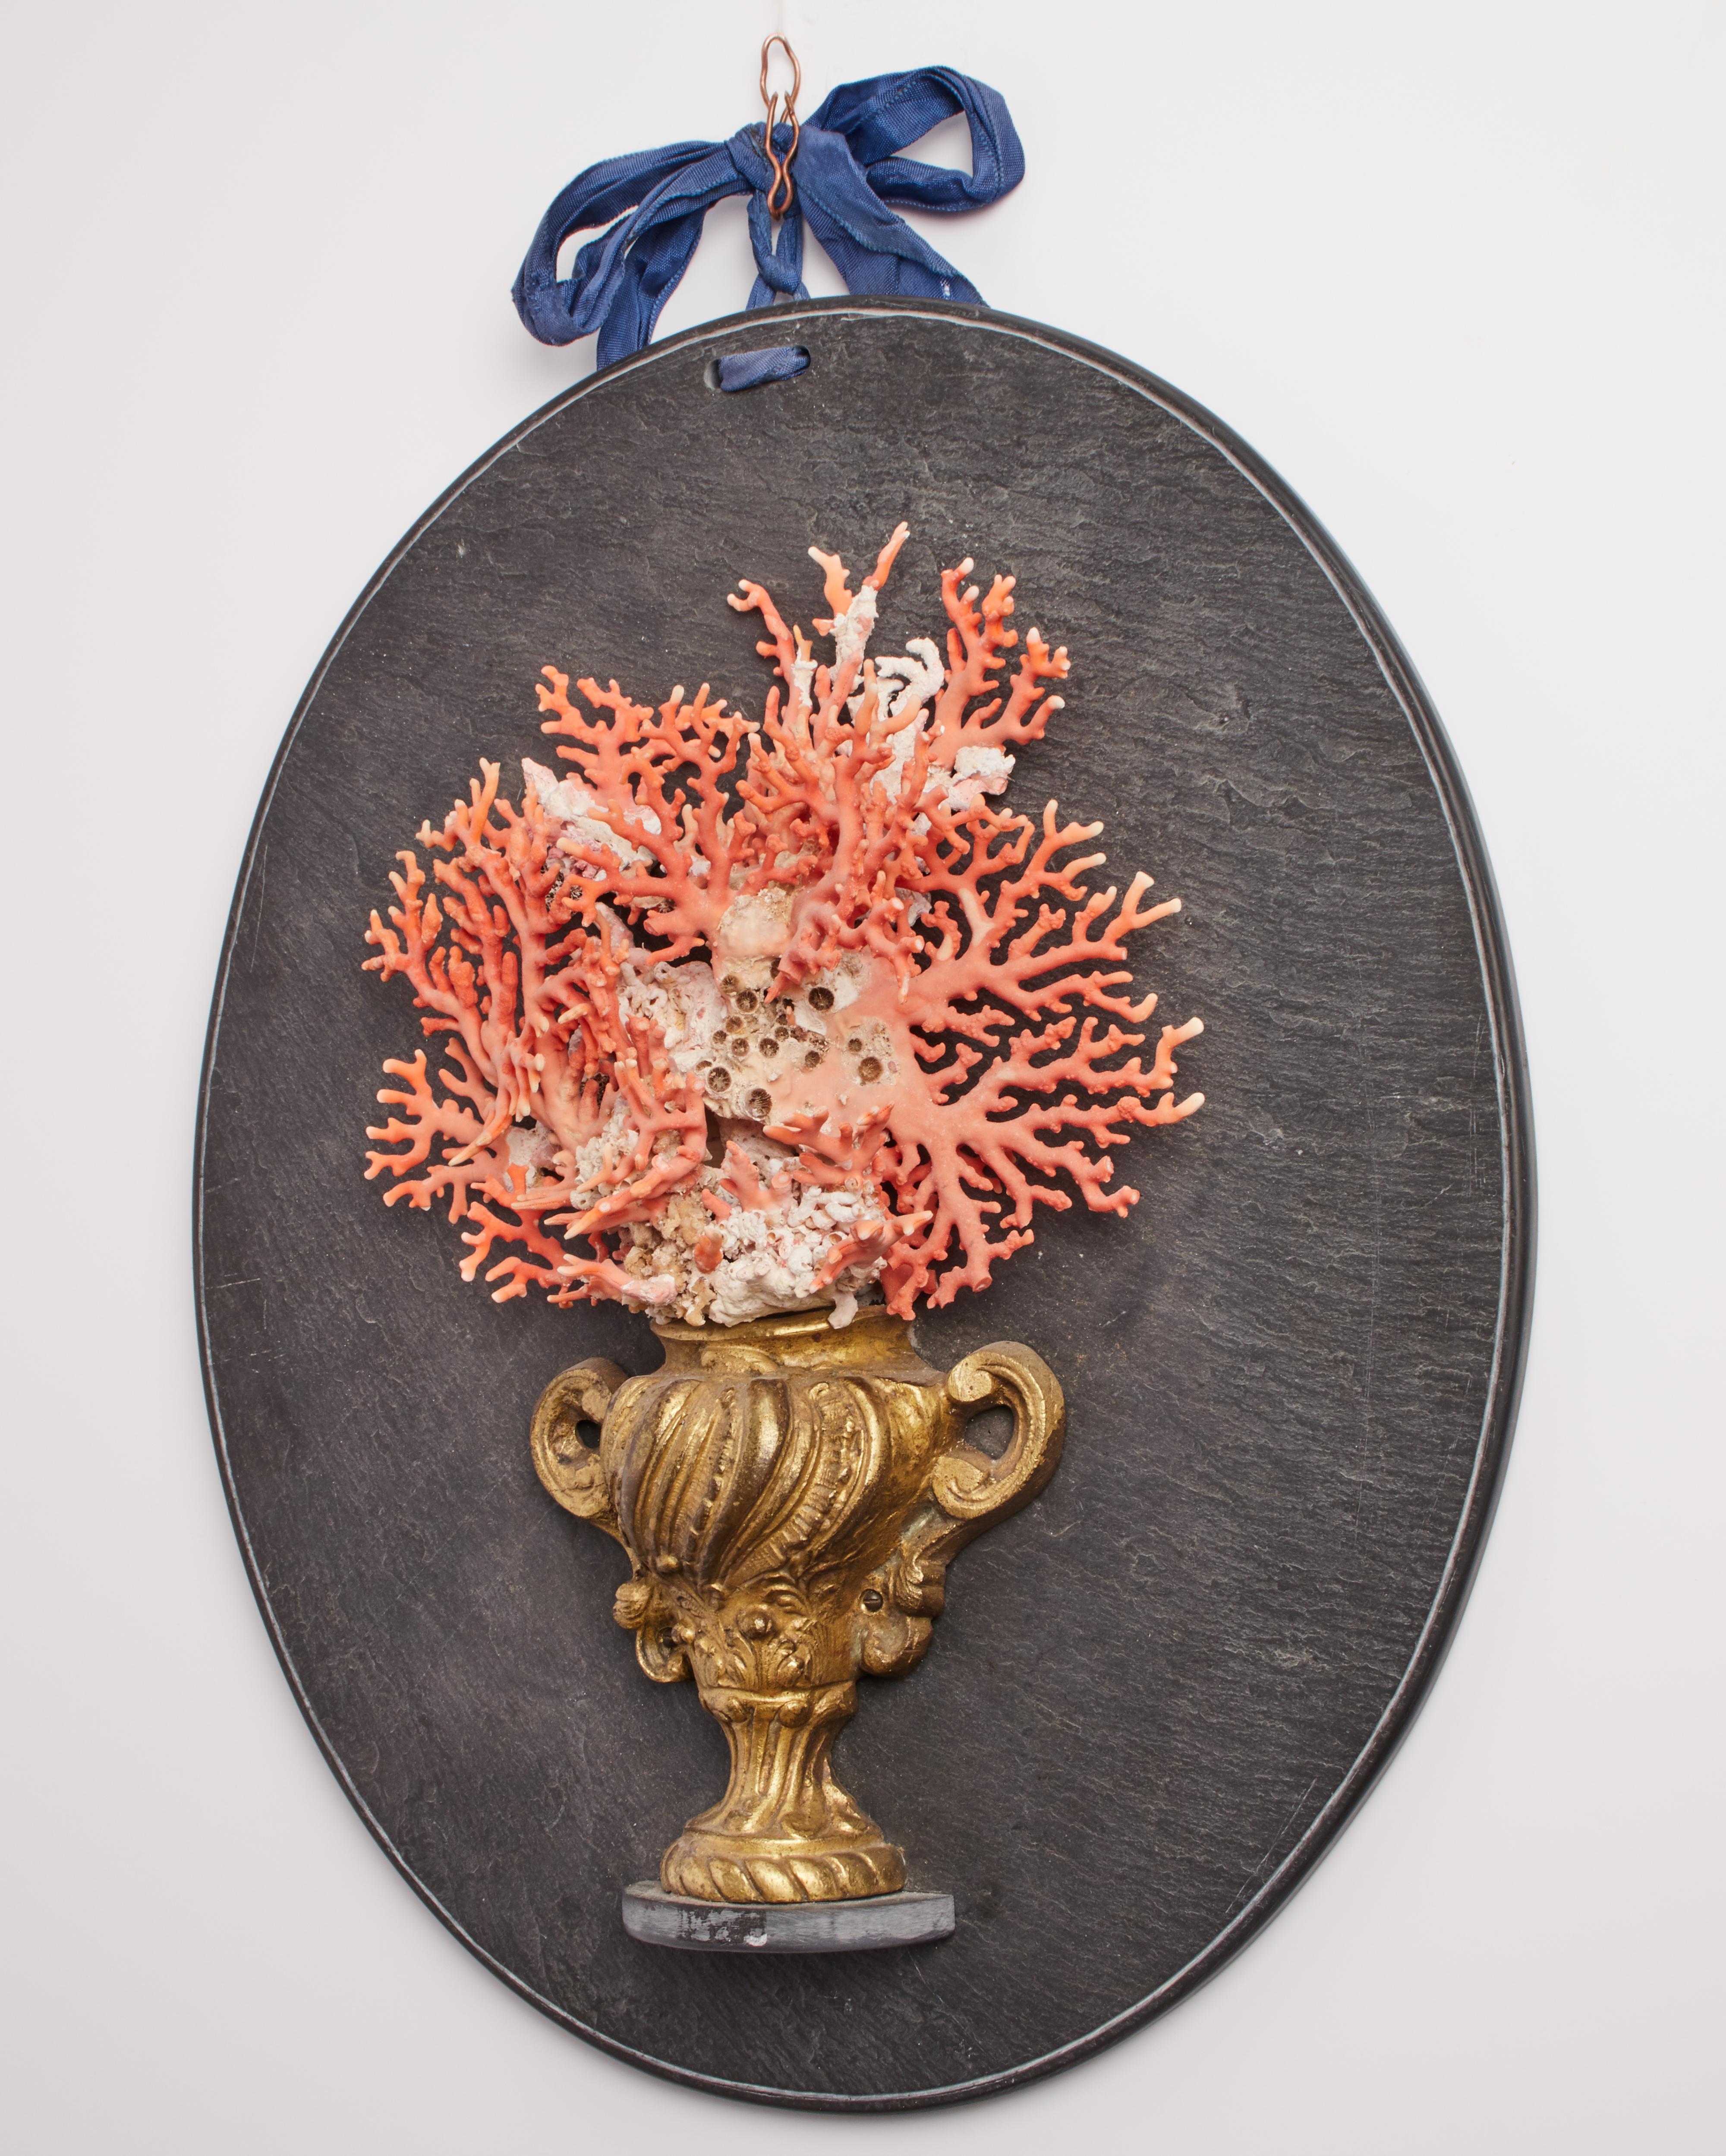 A Wunderkammer natural specimen. Cut off branches of Red Mediterranean (Rubrum) coral, mounted on an early golden painted wooden and bronze XVIII century base, depicting a vase. The coral sample fan shape is mounted over a slice of slate of oval